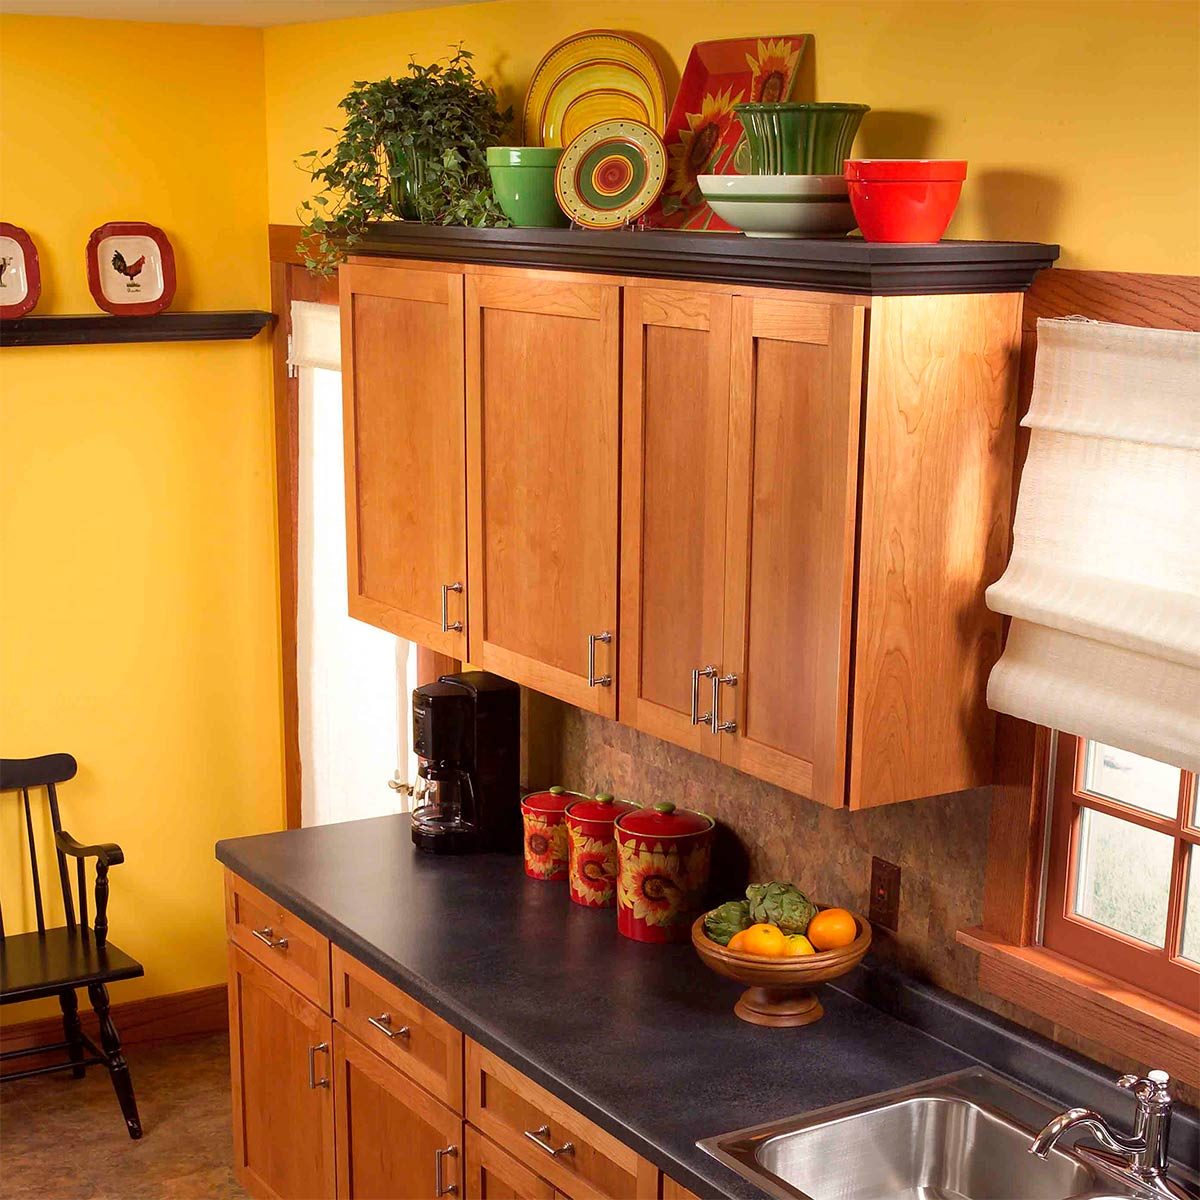 30 Cheap Kitchen Cabinet Add-Ons You Can DIY | The Family Handyman